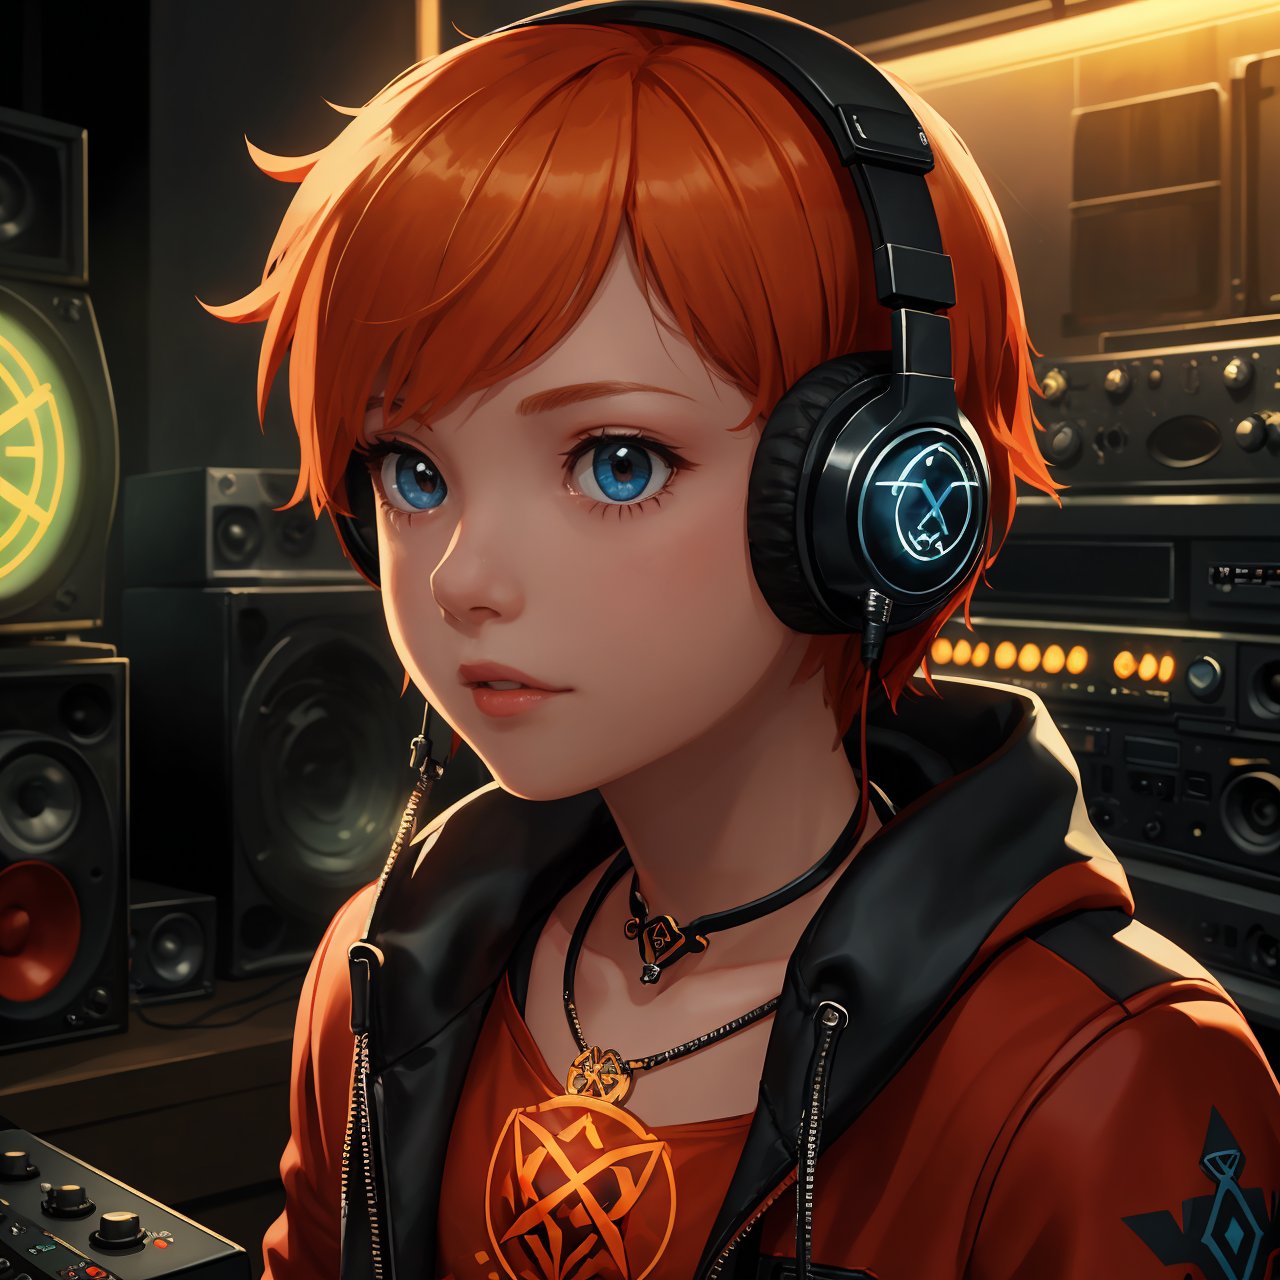 exquisite details and texture, detailed face, anatomy correct, best quality, ultra detailed, photorealistic, ((cinematic scenic view of 1 boy)), short hair, orange hair, sunglasses, wore a pair of headphones, red colored robe, cool, flame tattoos, flame pentagram necklace. He was a radio DJ, playing music in a tiny radio studio, front view, upper body, Cyberpunk style